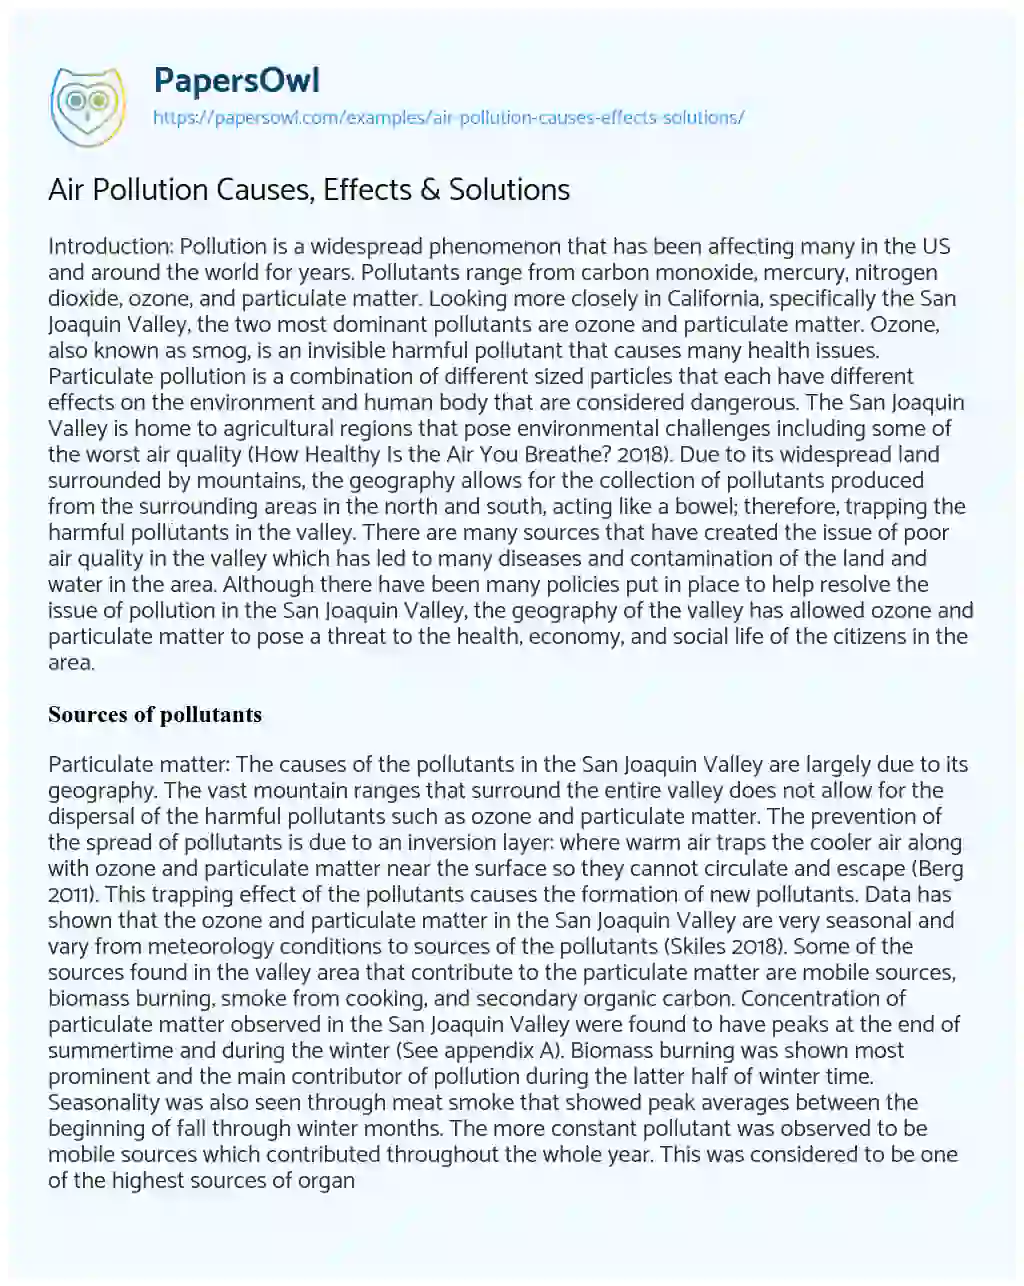 Essay on Air Pollution Causes, Effects & Solutions